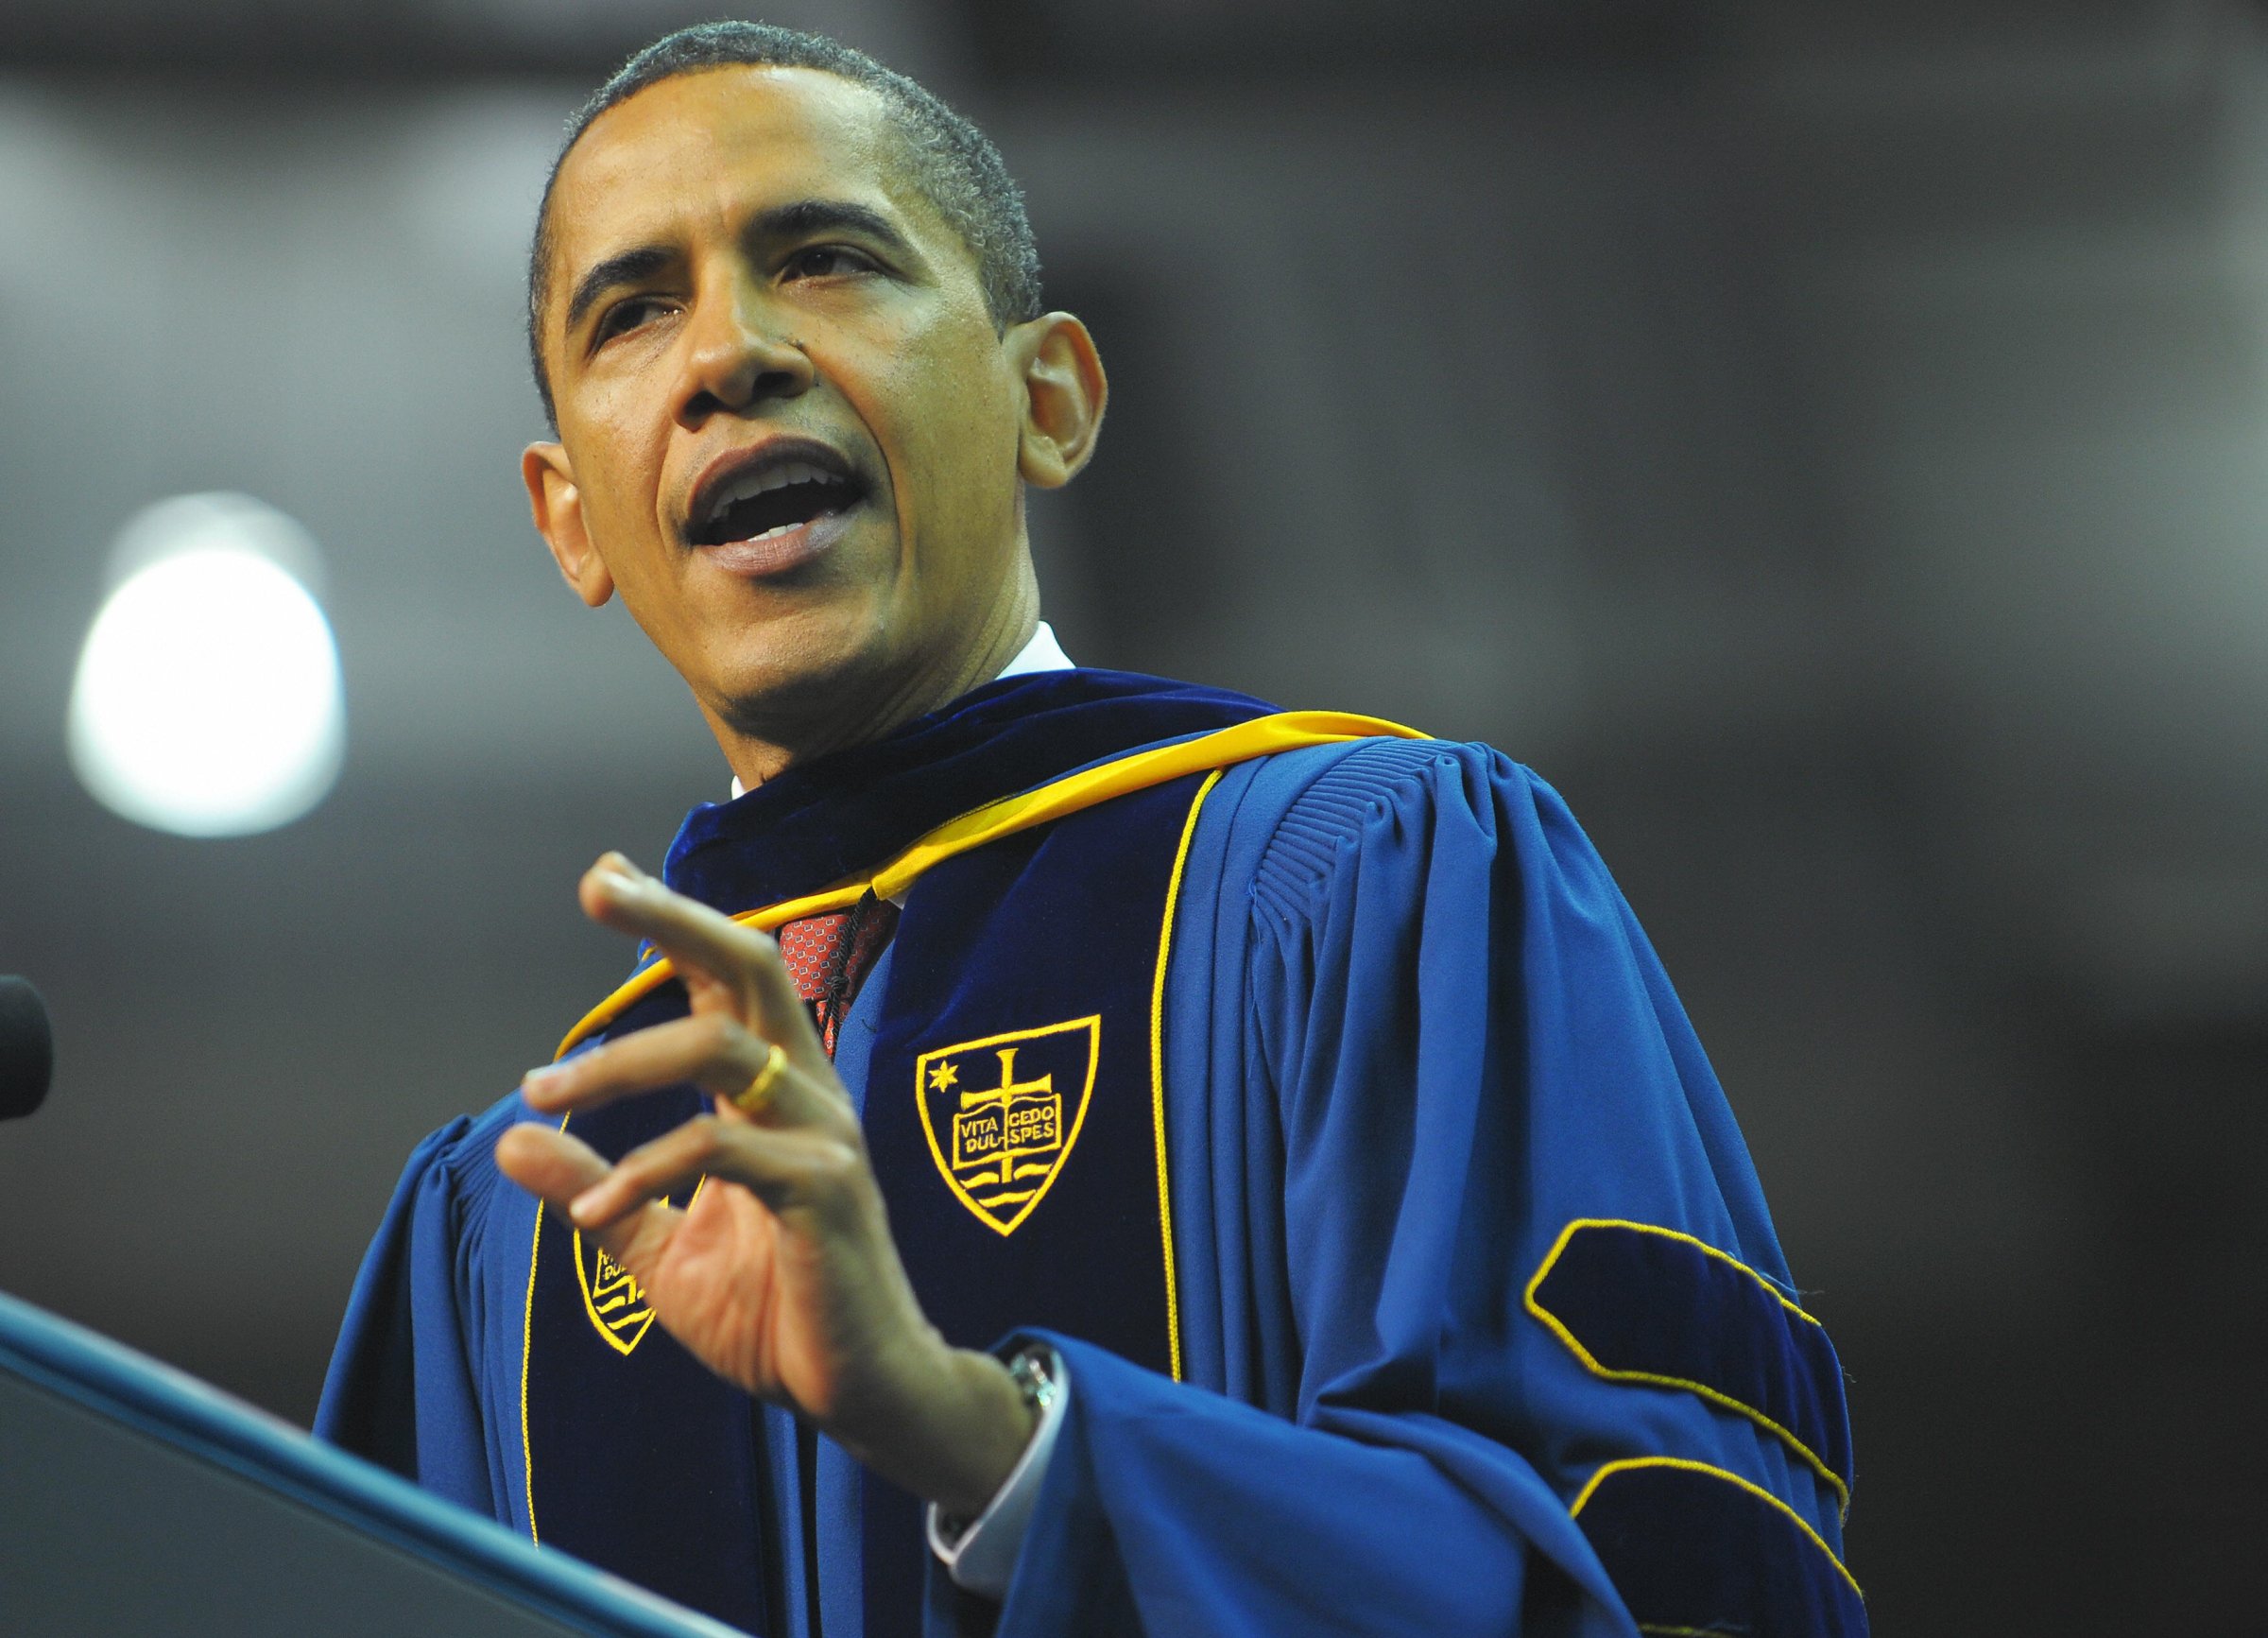 US President Barack Obama speaks during the commencement ceremony in the Joyce Center of Notre Dame University in South Bend, Indiana, May 17, 2009.